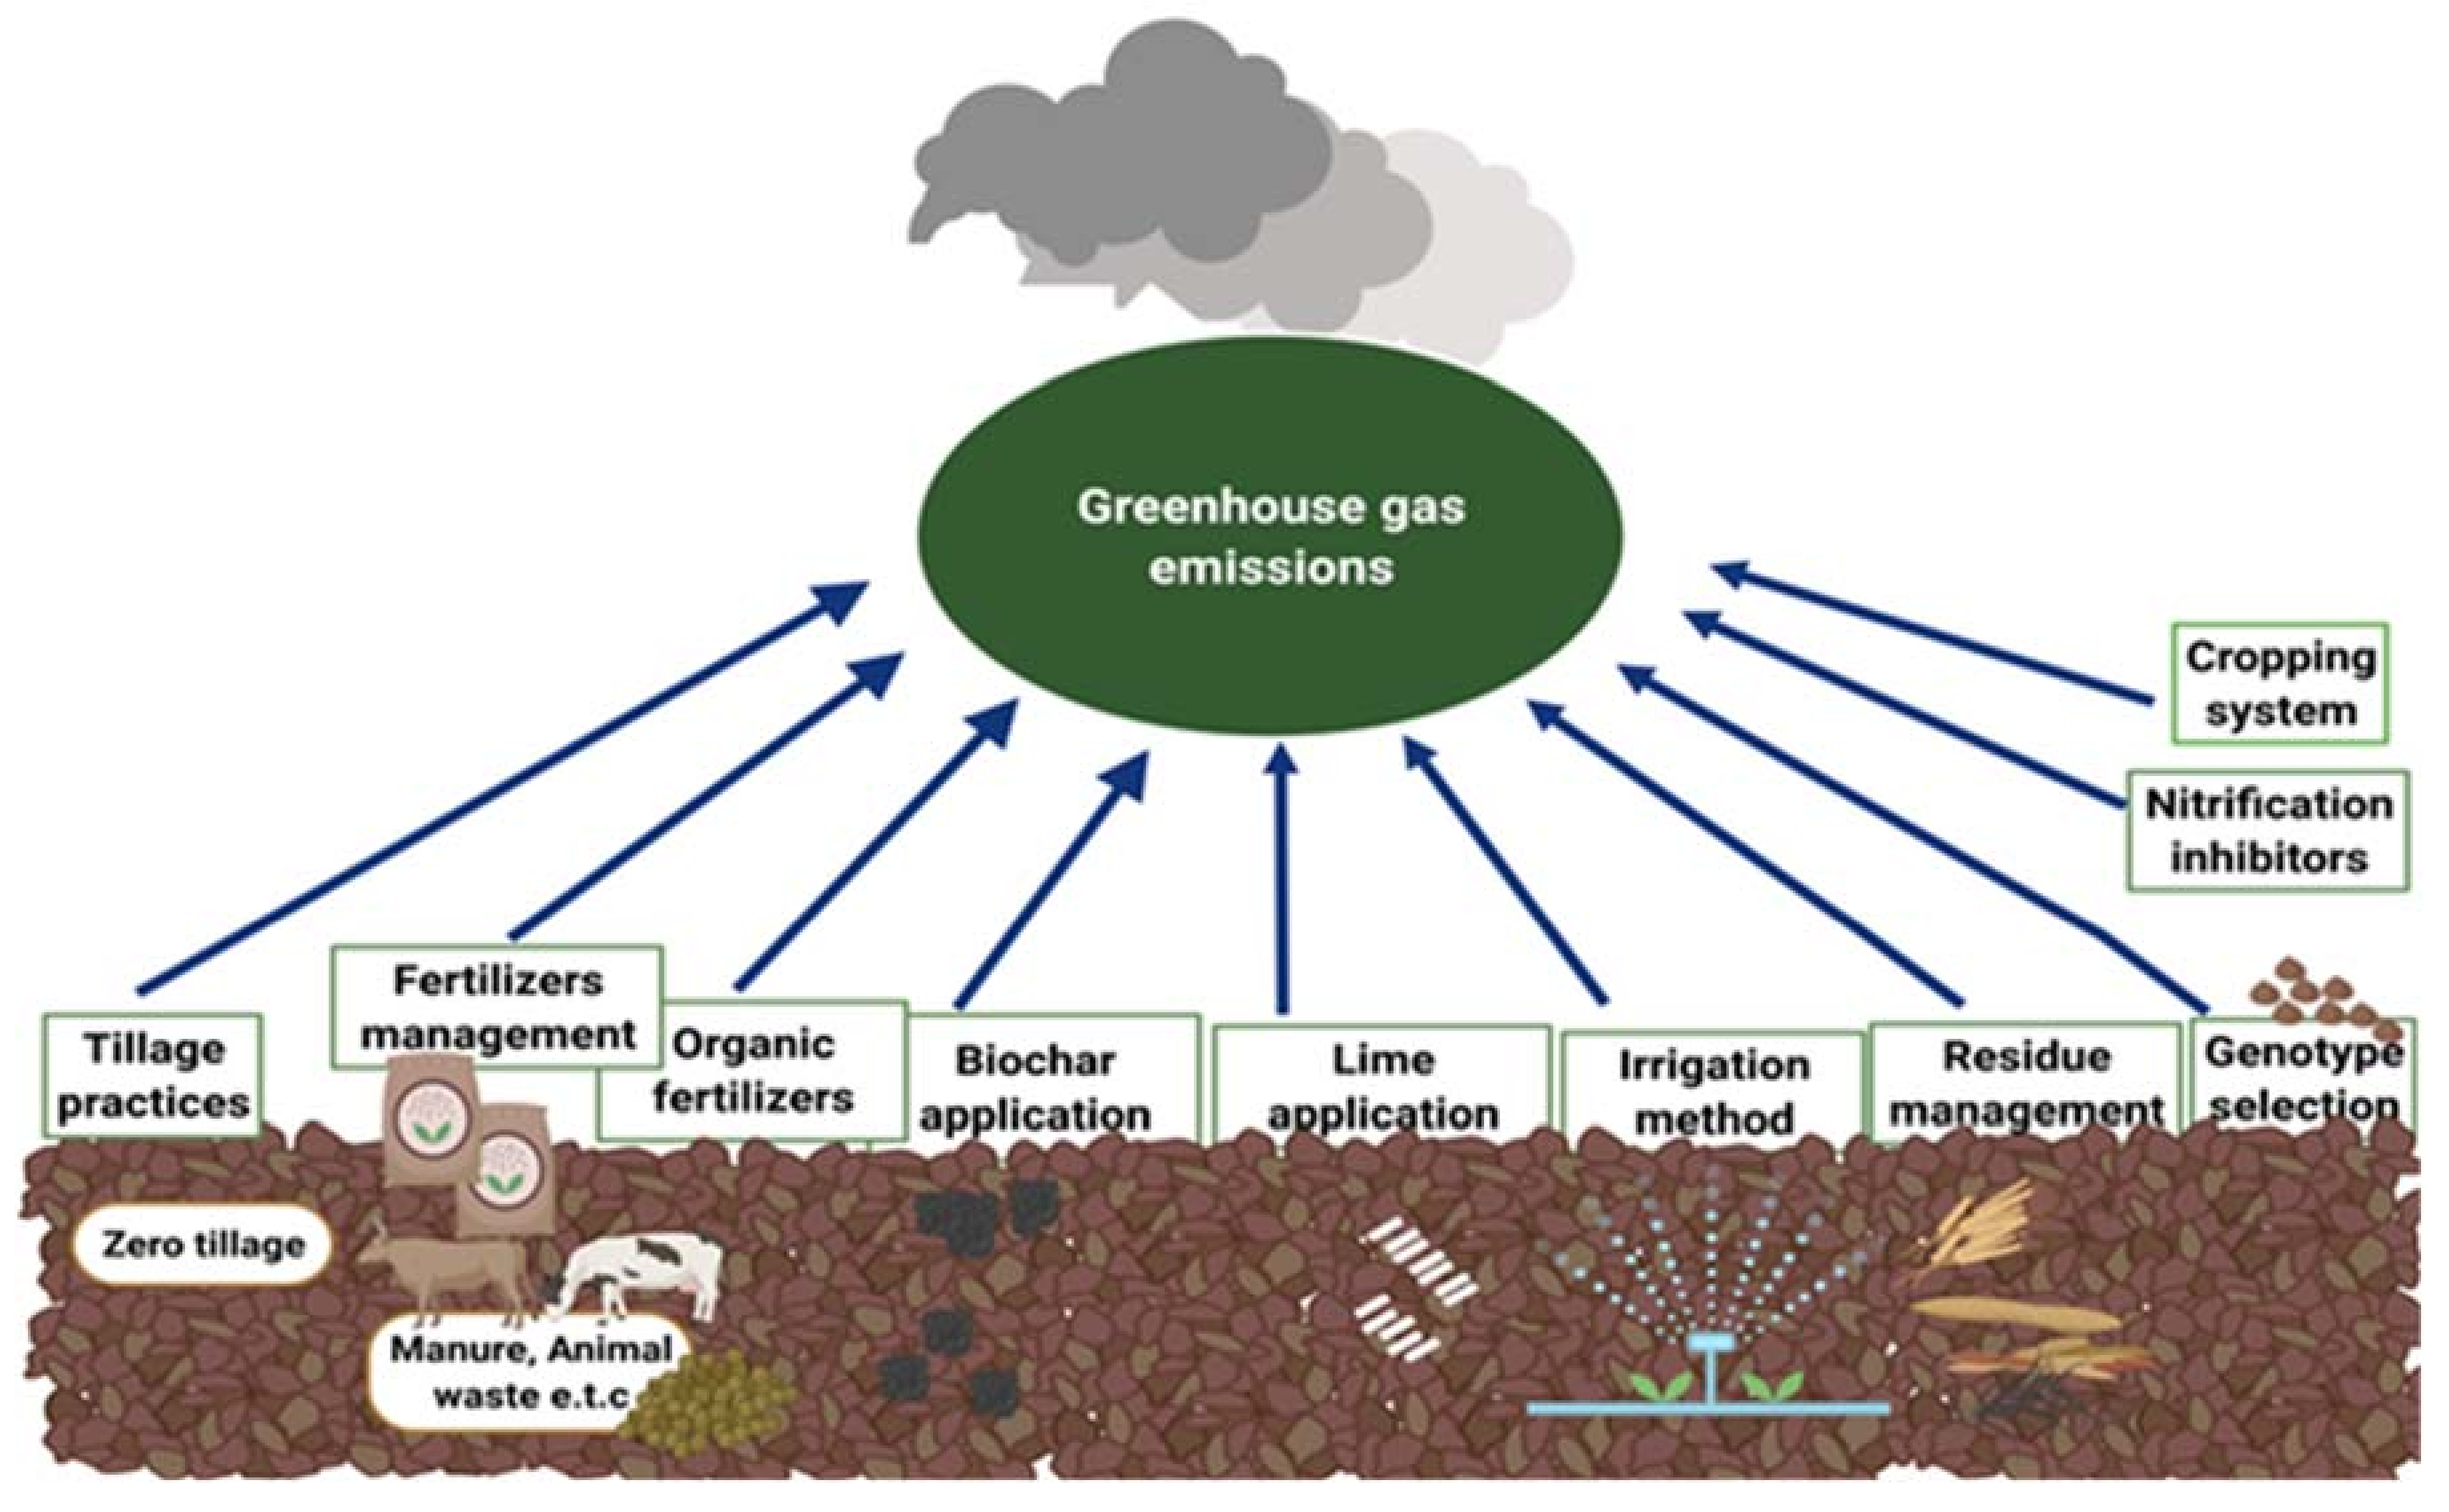 PDF) Editorial: Greenhouse Gas Emissions and Emissions Mitigation from  Agricultural and Horticultural Production Systems